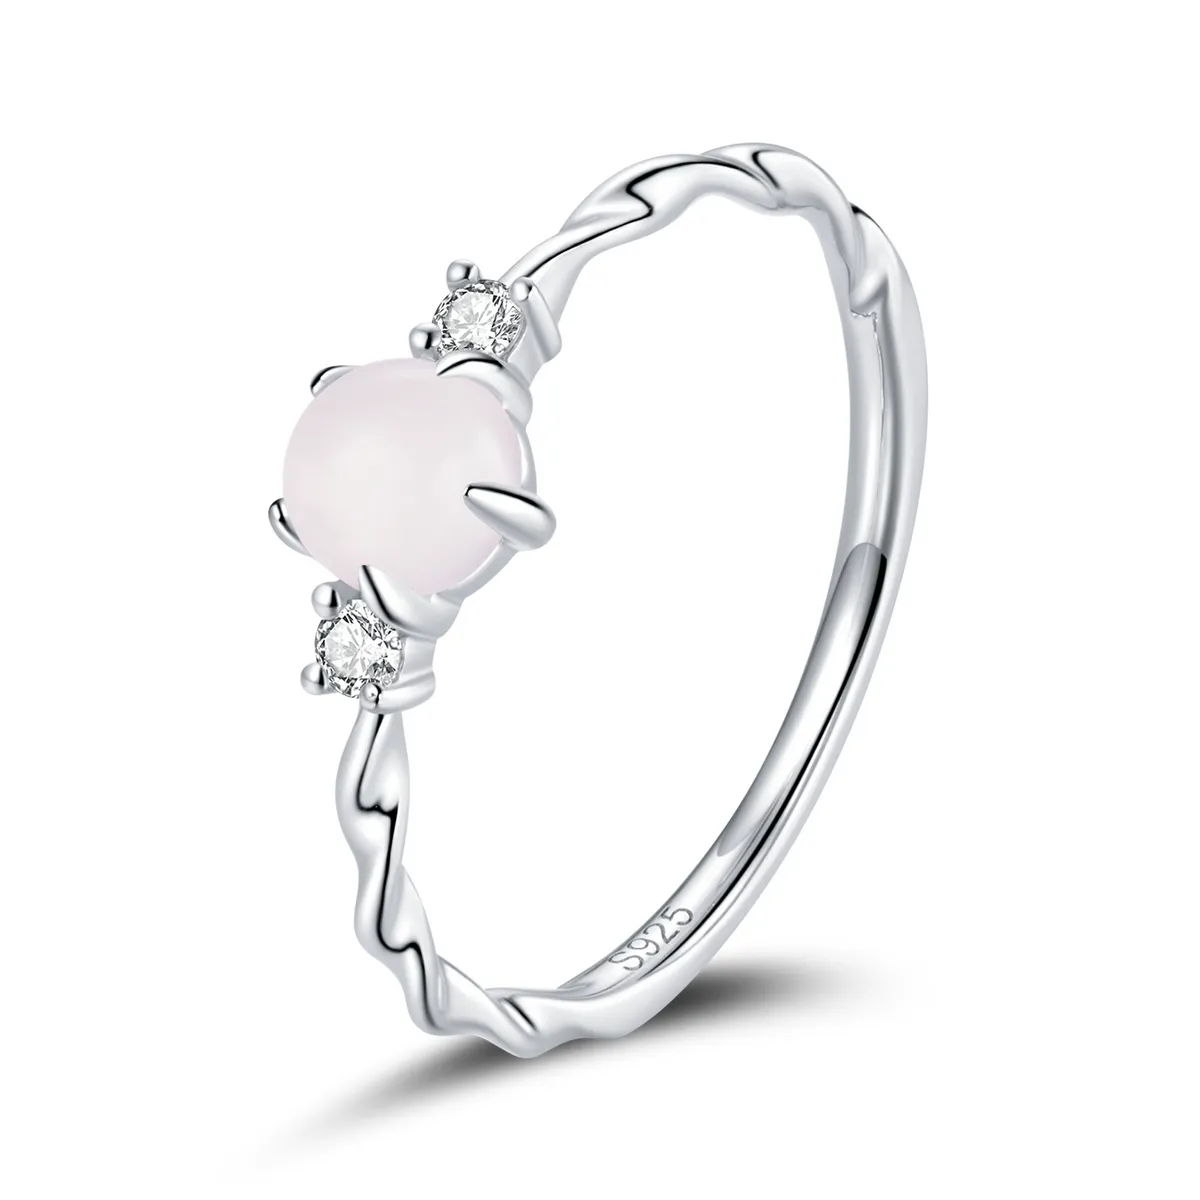 Pandora Style Silver Pear Ring - SCR689